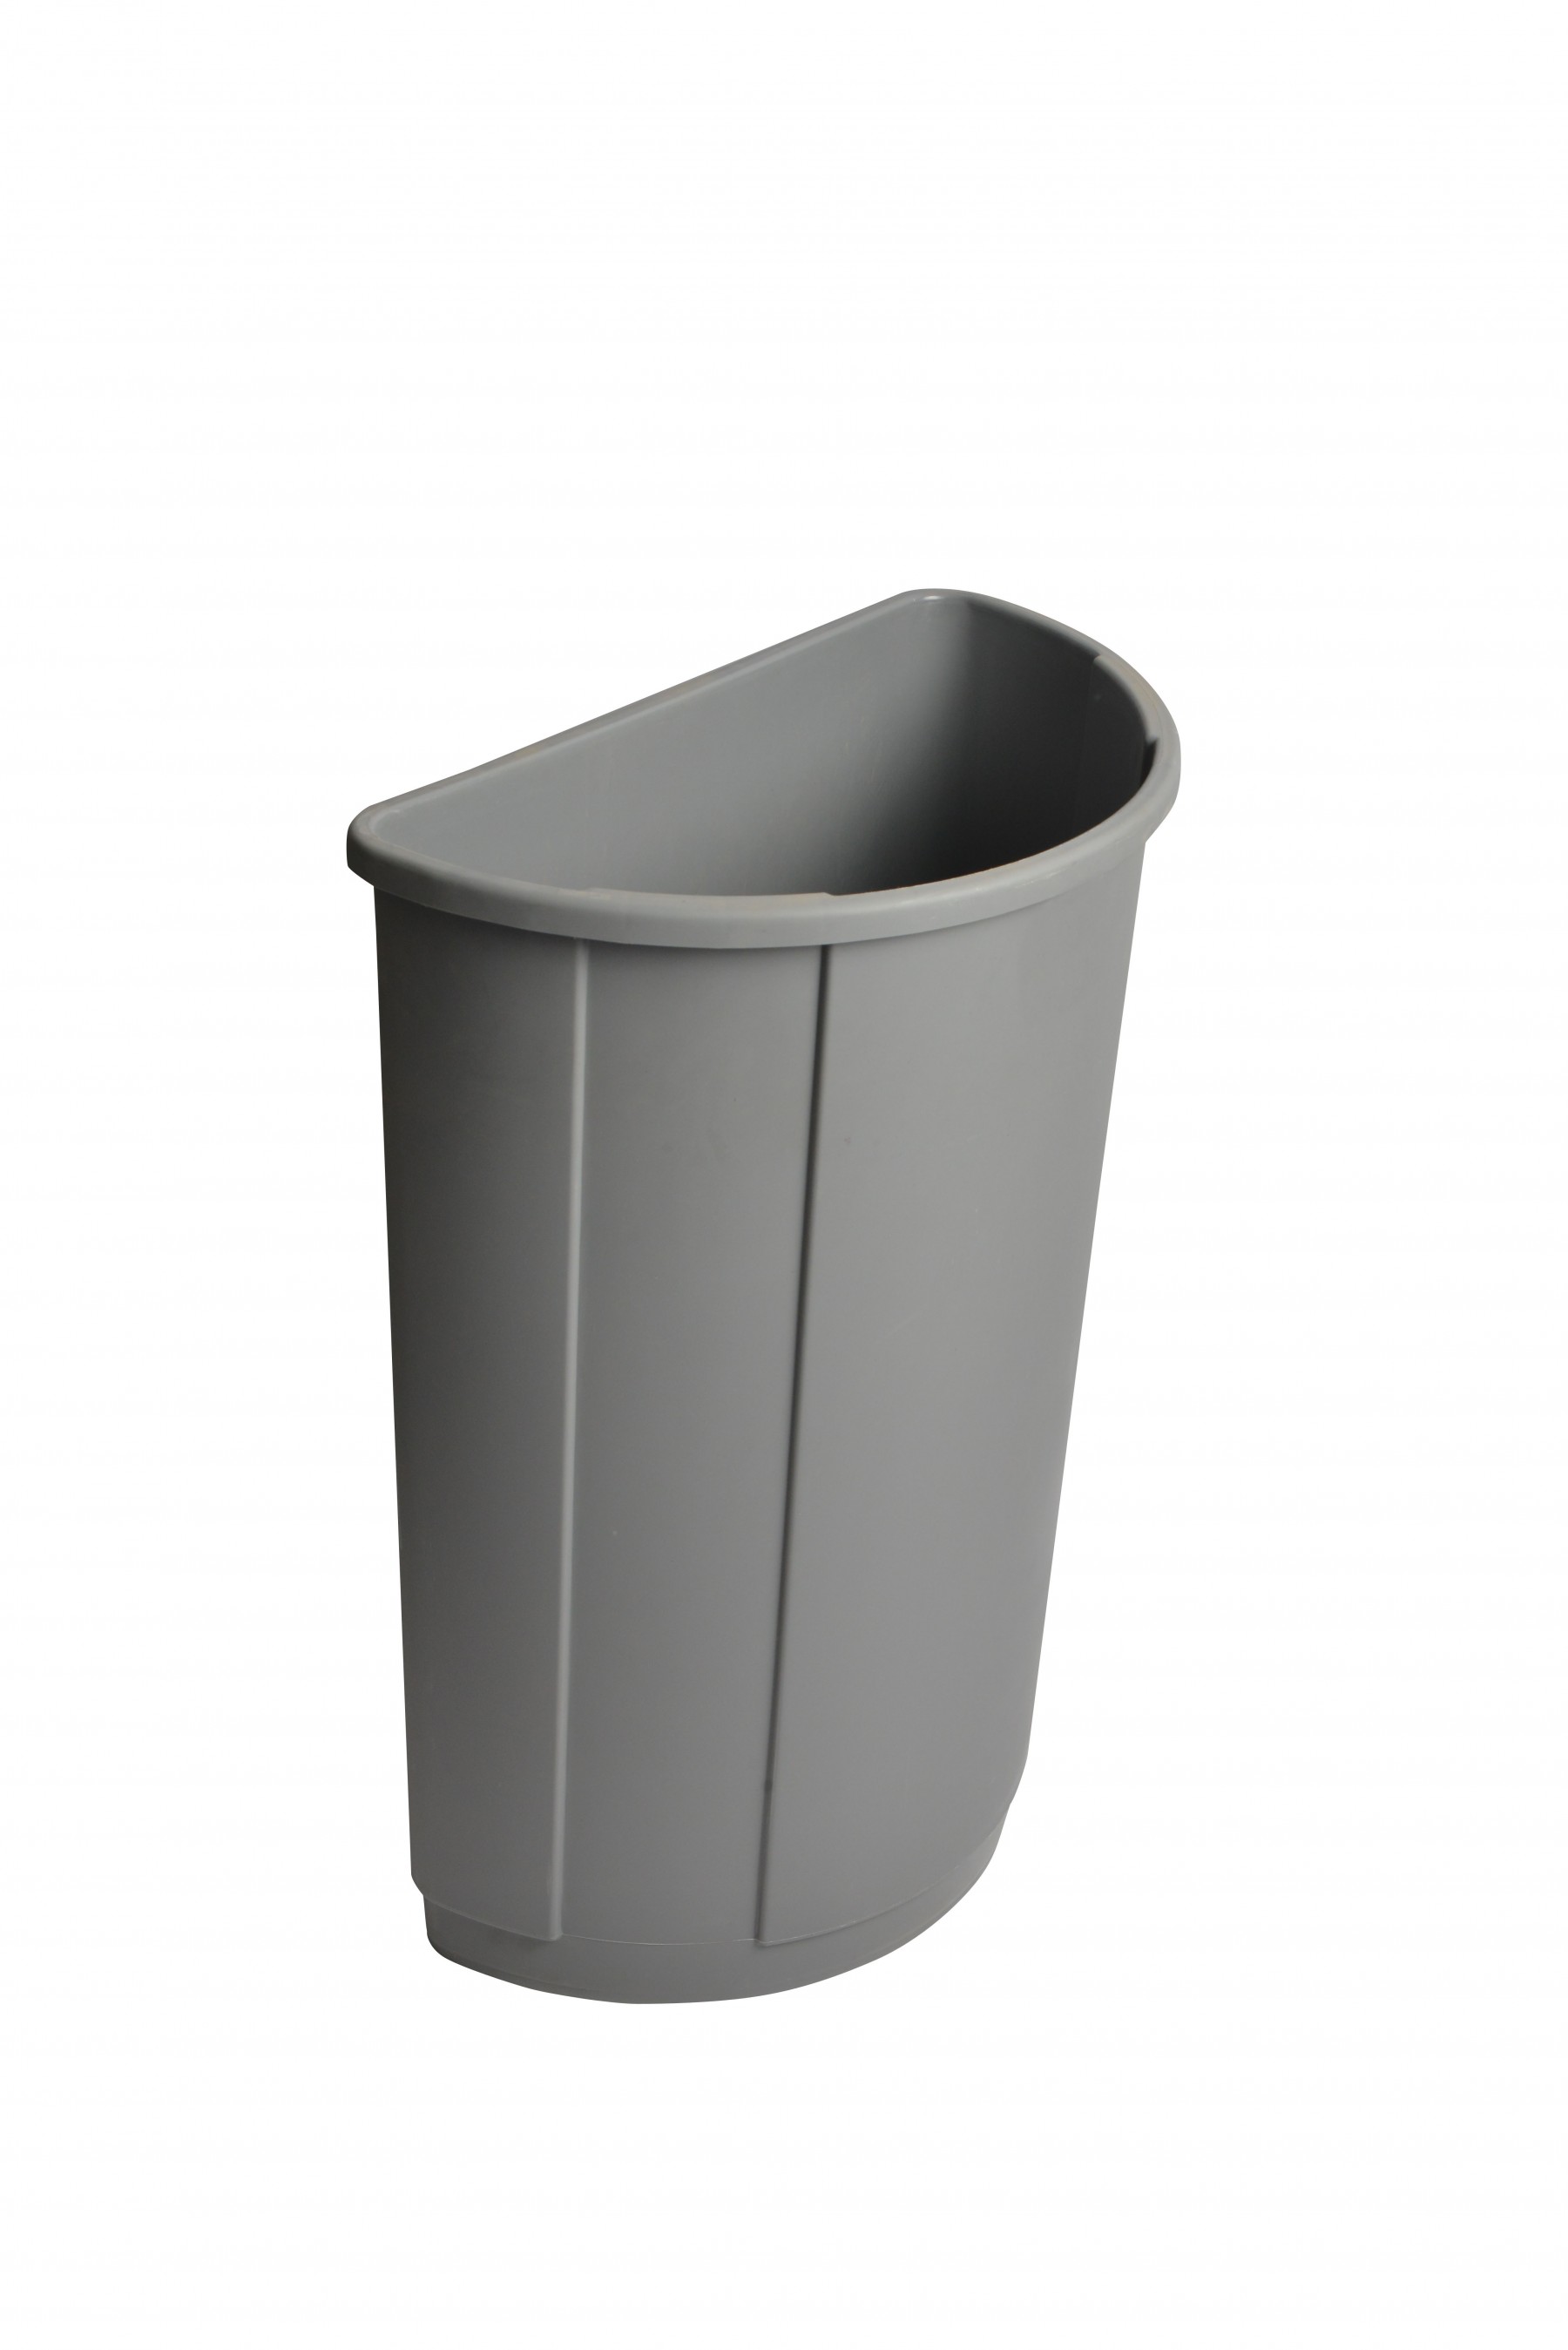 1123GY Grey Half Round Garbage Can with 23 Gallon Capacity